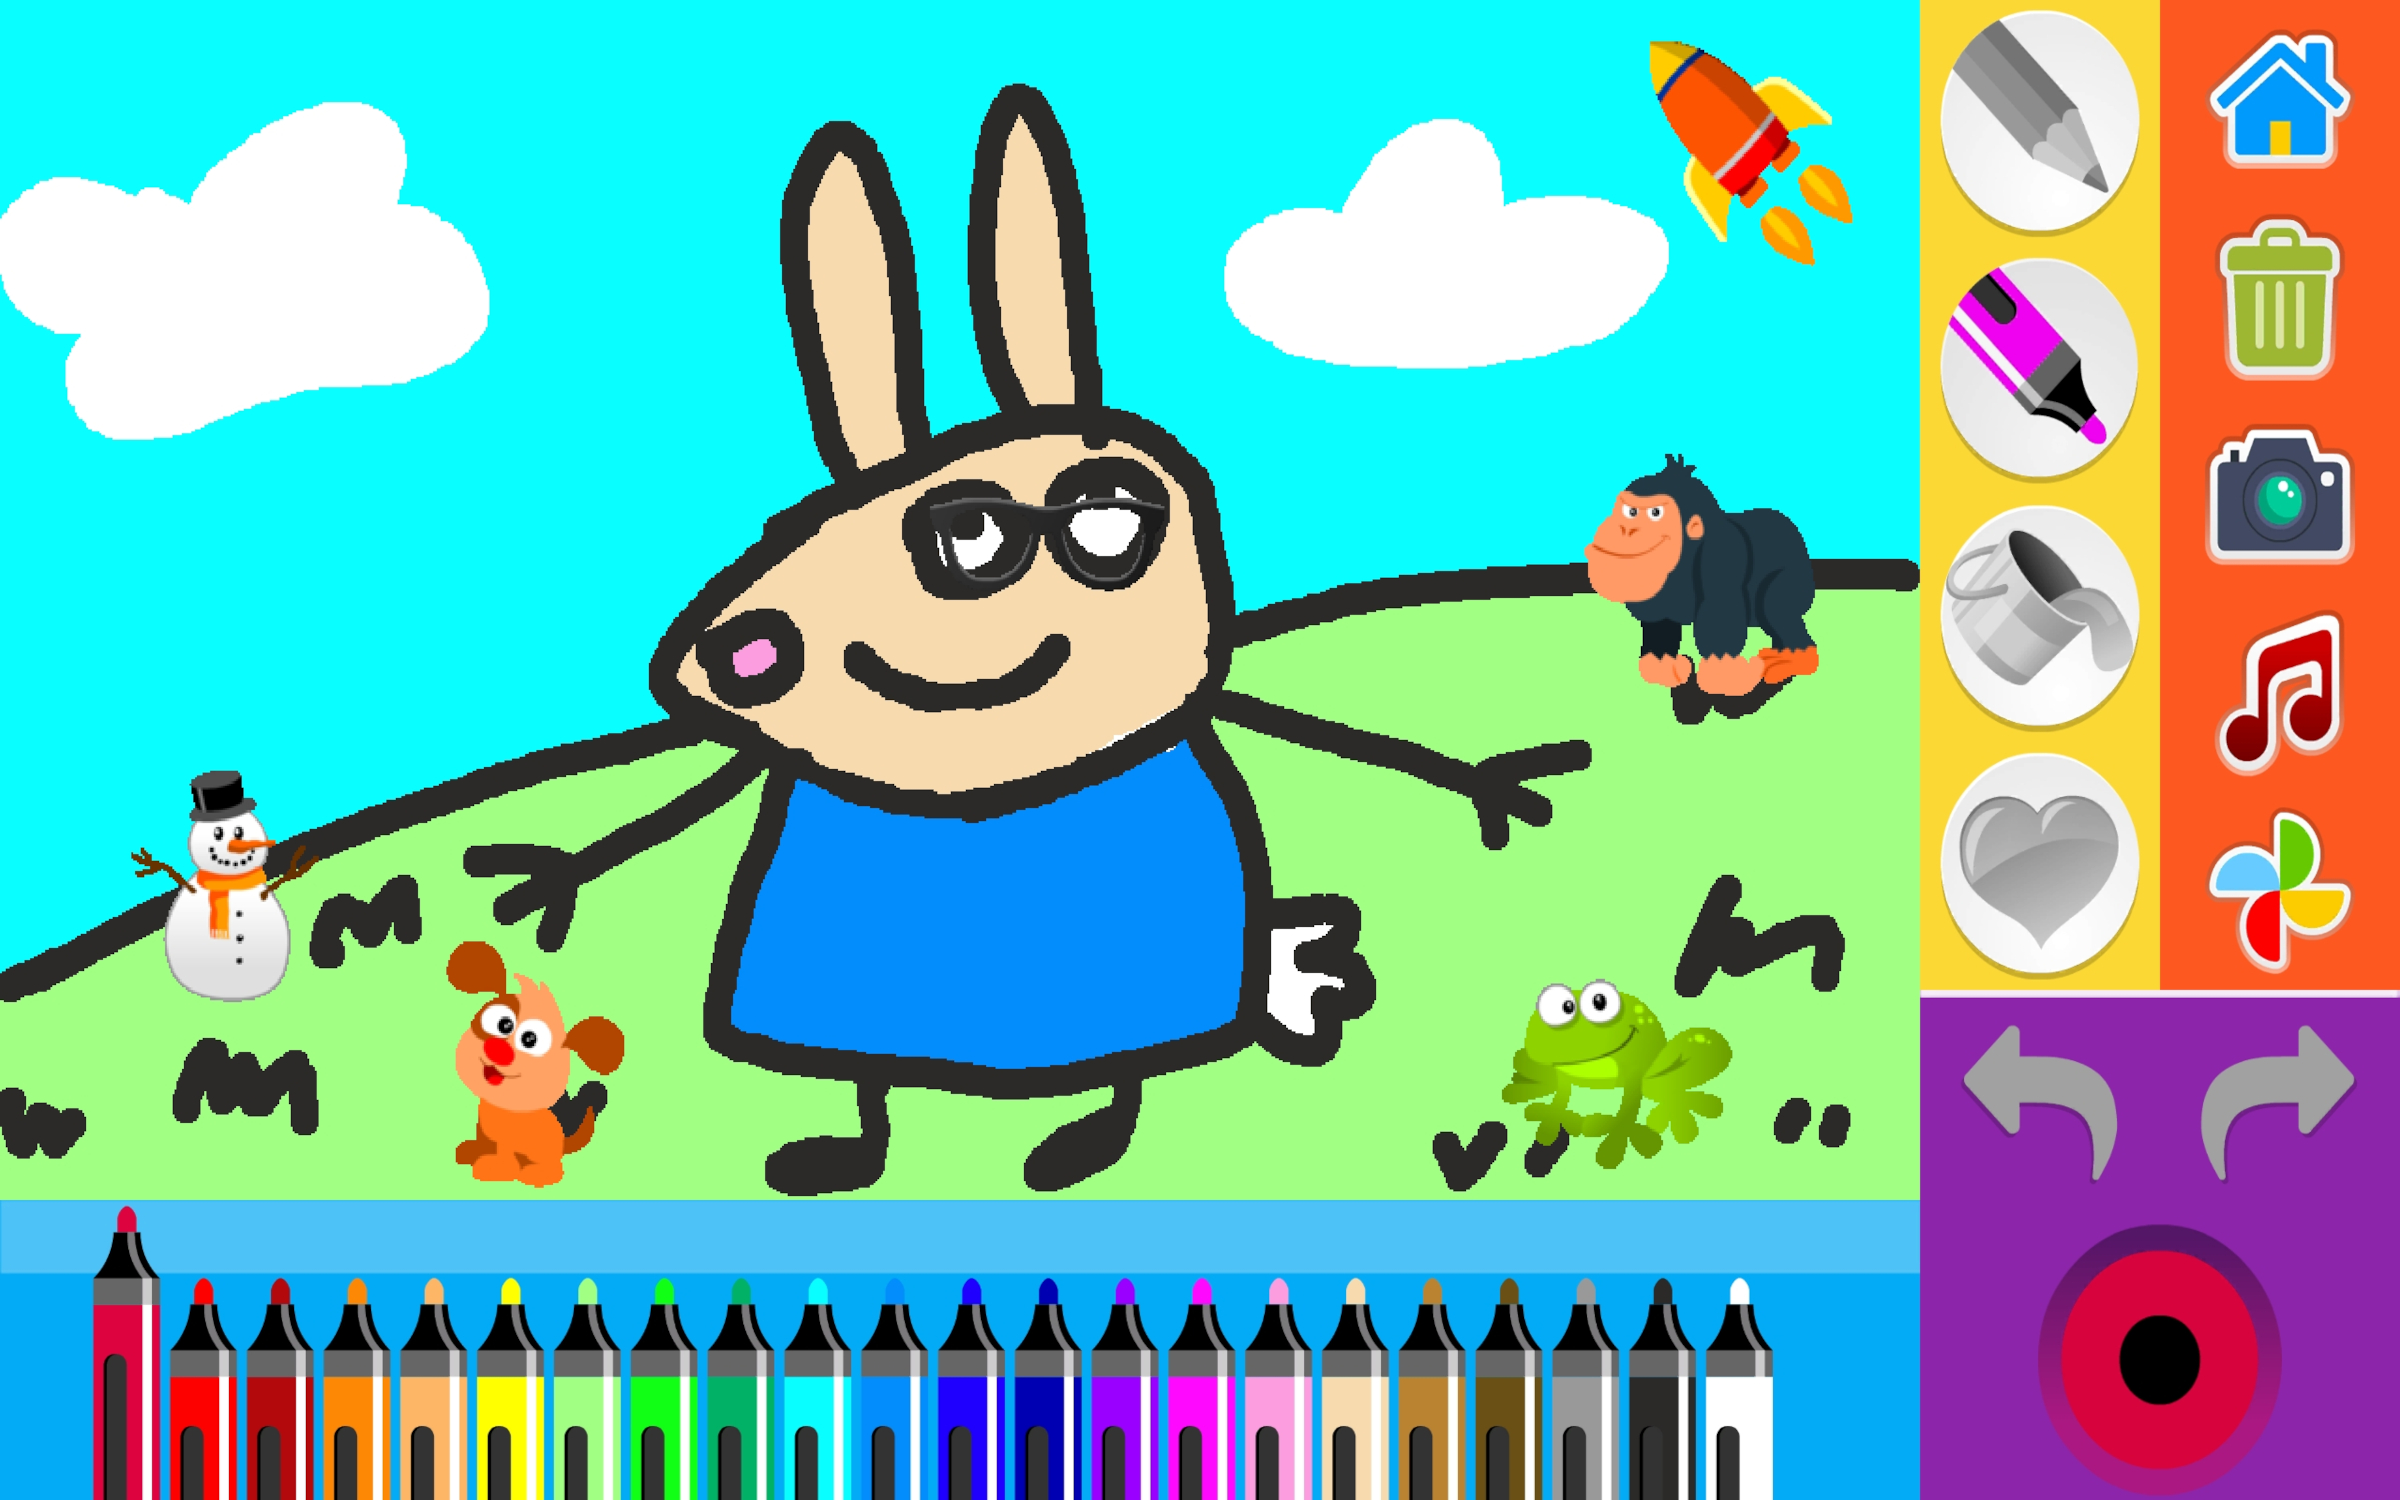 Coloring Book Kids Game | Unity Project With Admob for Android and iOS